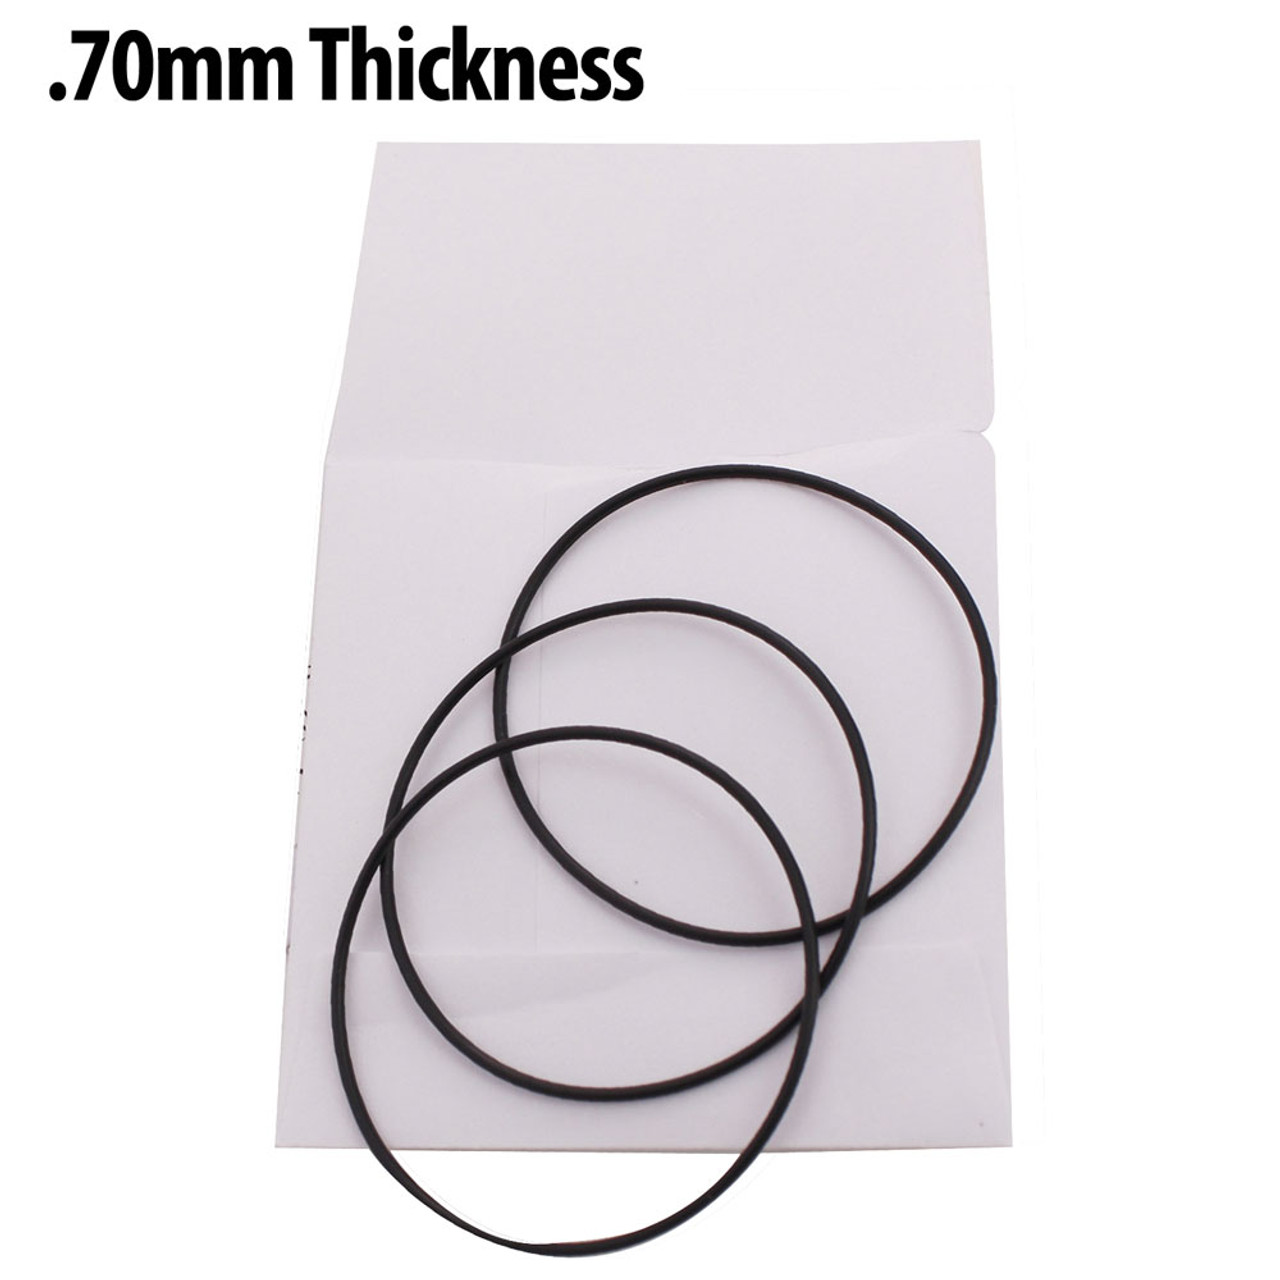 Wholesale NBR O Ring Seal Gasket CS 4mm OD 16mm ~ 150mm Nitrile Butadiene  Rubber Spacer Oil Resistance Washer Round Shape Black Customization  Available From Xinrongkeji, $7.44 | DHgate.Com